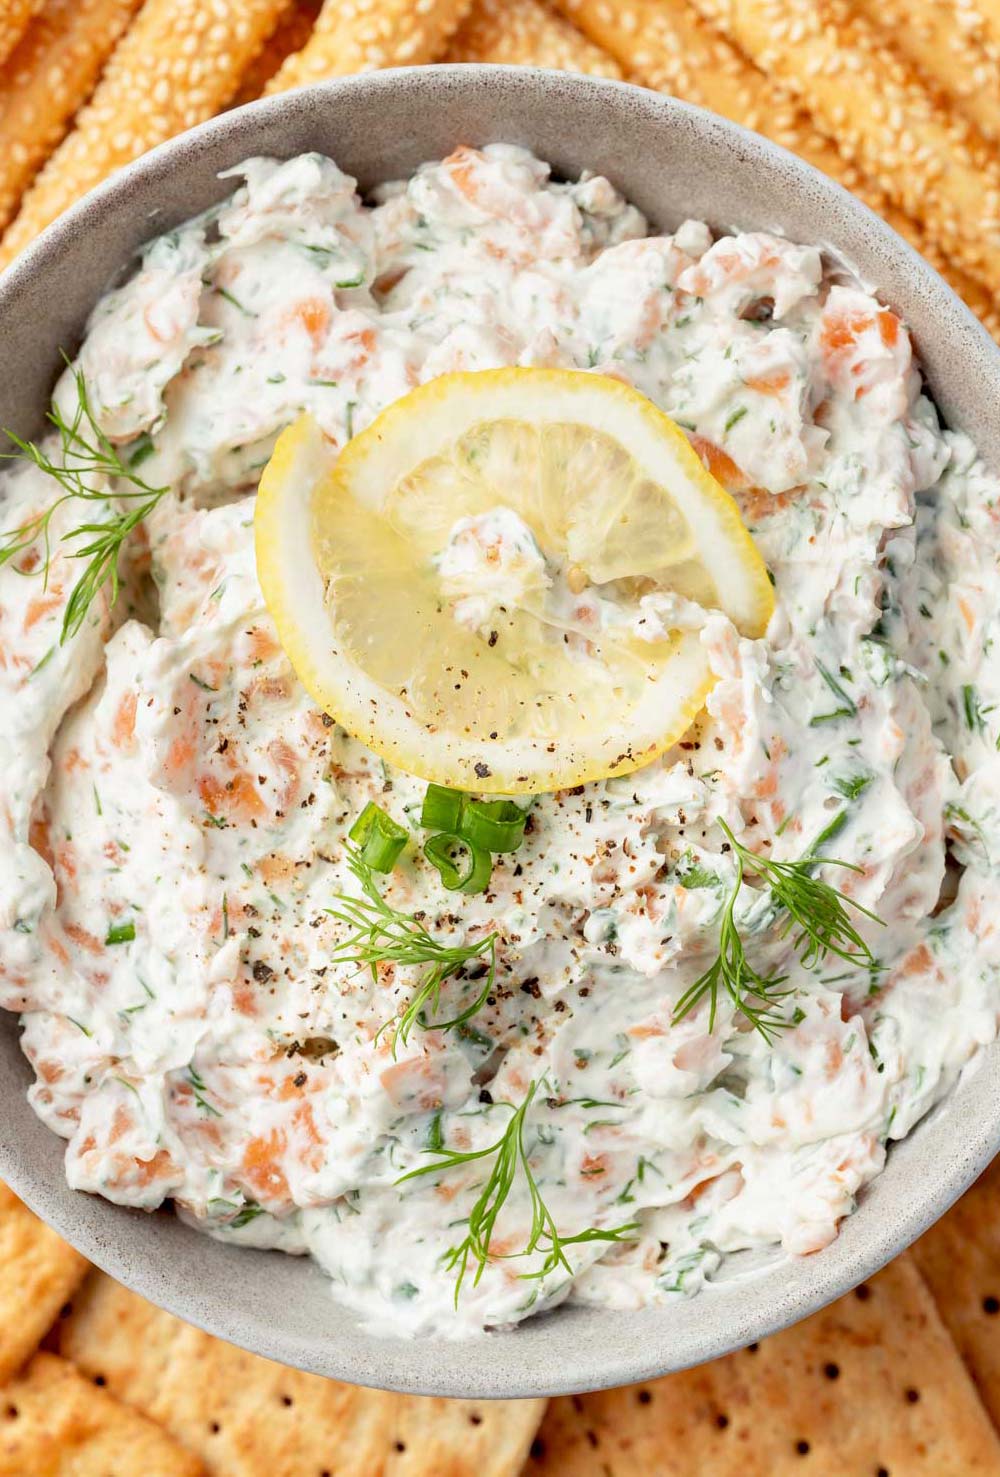 The overhead image of bowl filled with creamy smoked salmon dip, garnished with thinly sliced lemon rounds and sprigs of fresh dill.